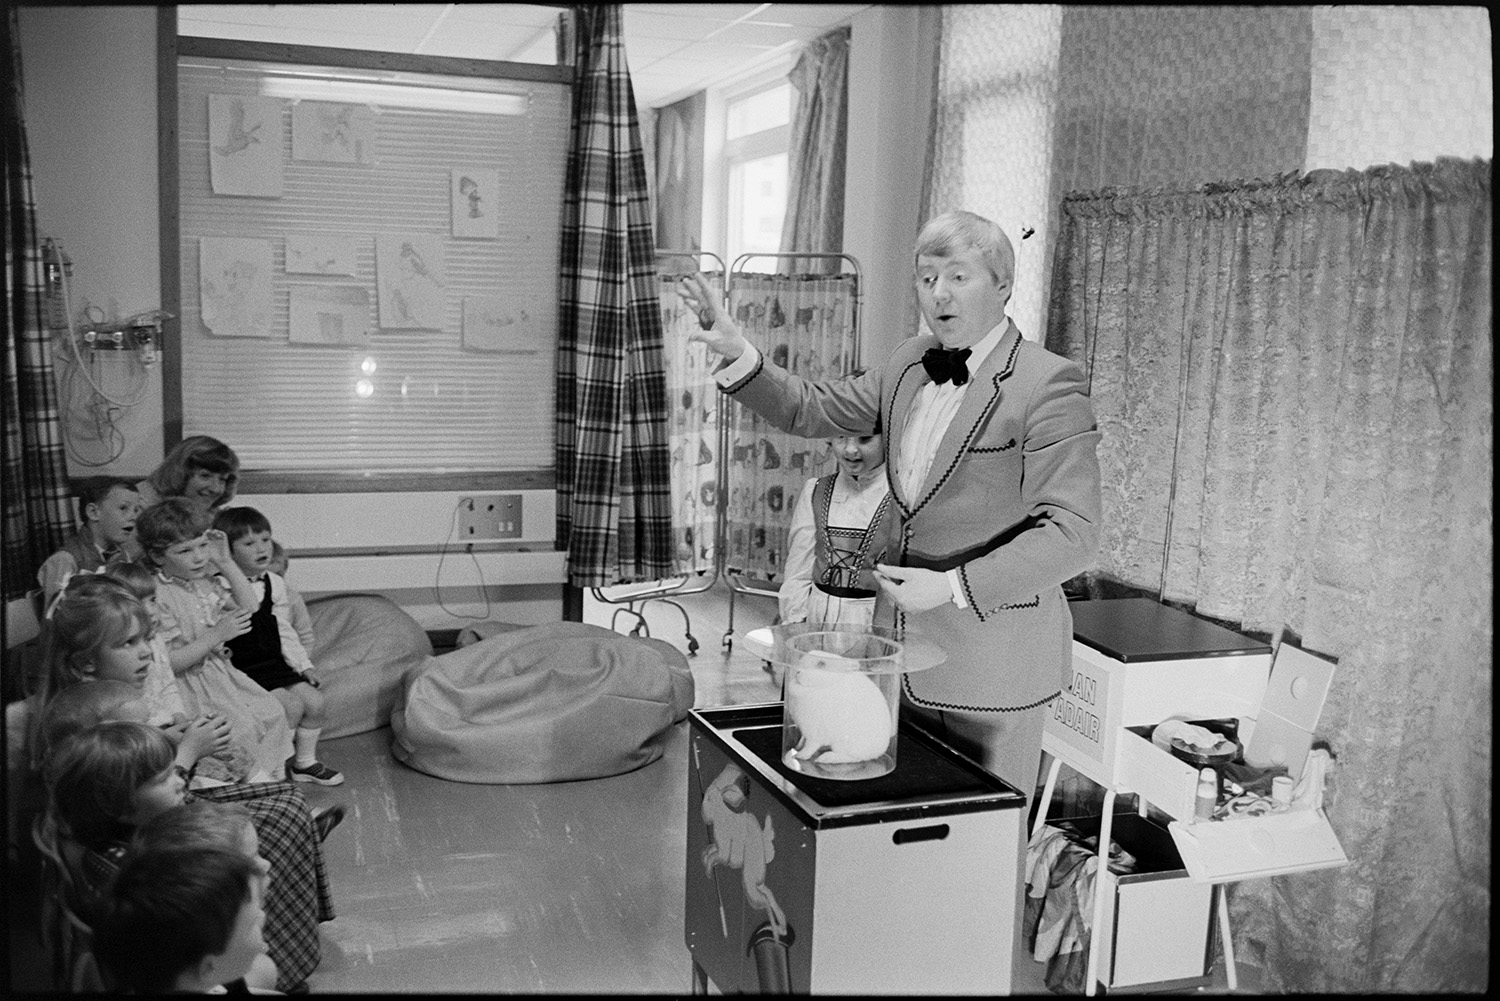 Conjuror at children's party in hospital. 
[Ian Adair, a magician, entertaining children at a party on the Children's Ward at Barnstaple General Hospital. He has a rabbit in a hat.]